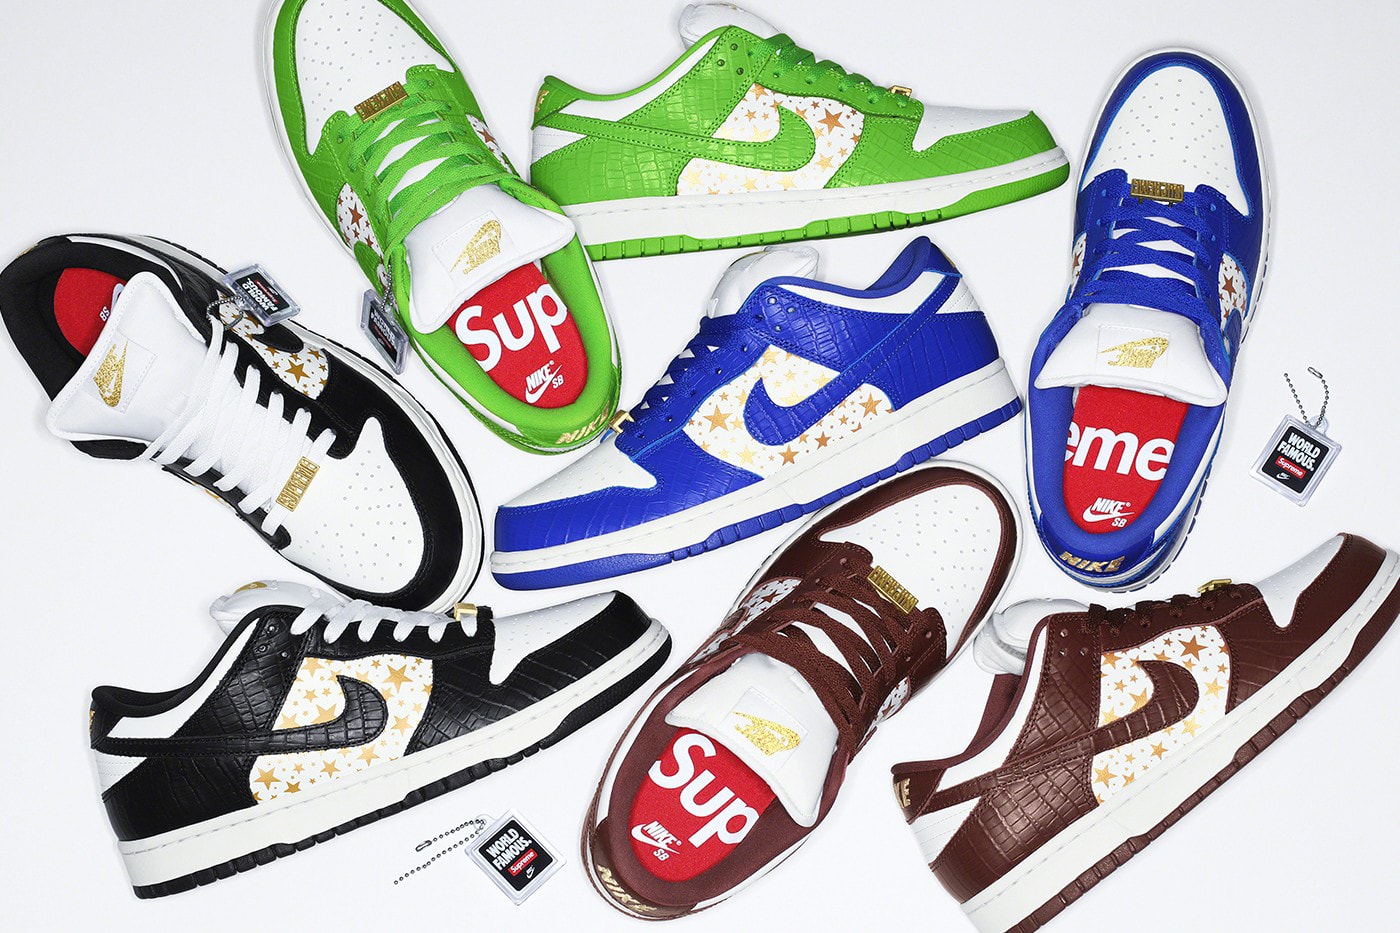 Supreme x Nike SB Dunk Low Spring Summer 2021 Collaboration Mean Green